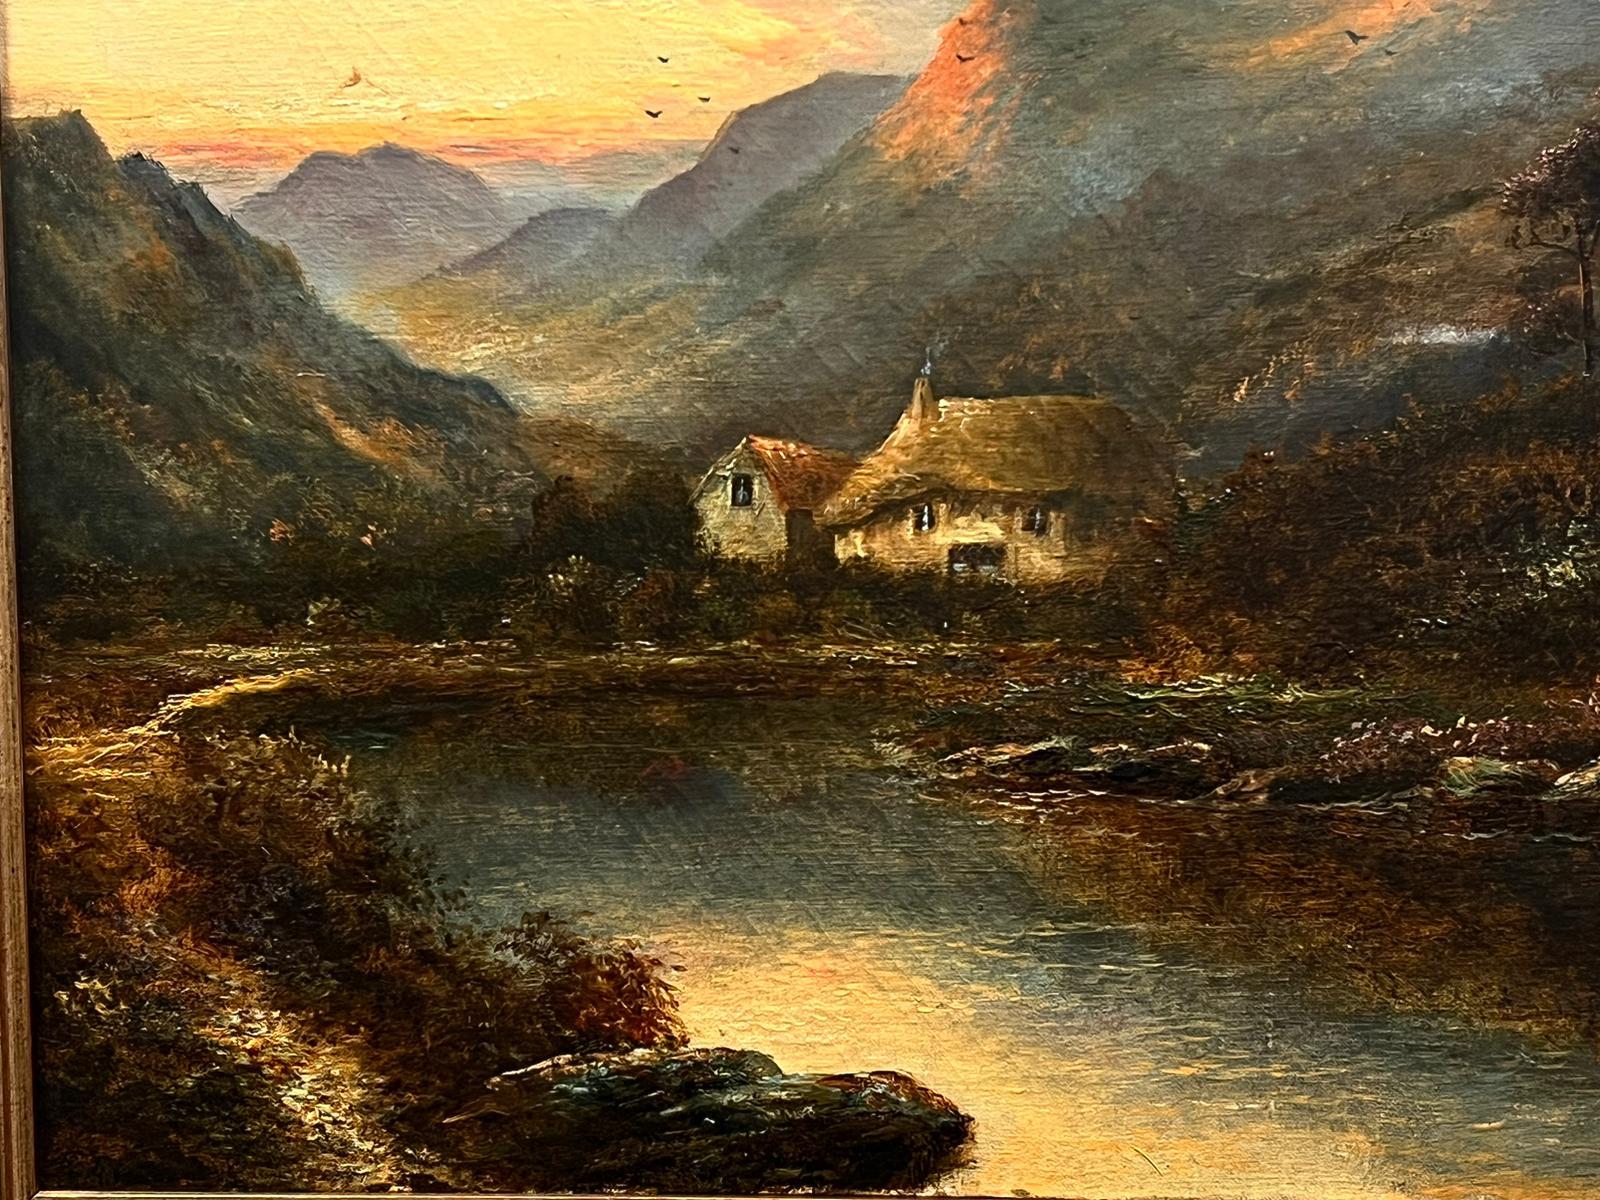 The Scottish Highlands
Charles M.C Kinley (British antique)
signed oil painting on canvas, framed
framed: 18.5 x 26 inches
canvas: 16 x 24 inches
provenance: private collection, England 
condition: overall very good